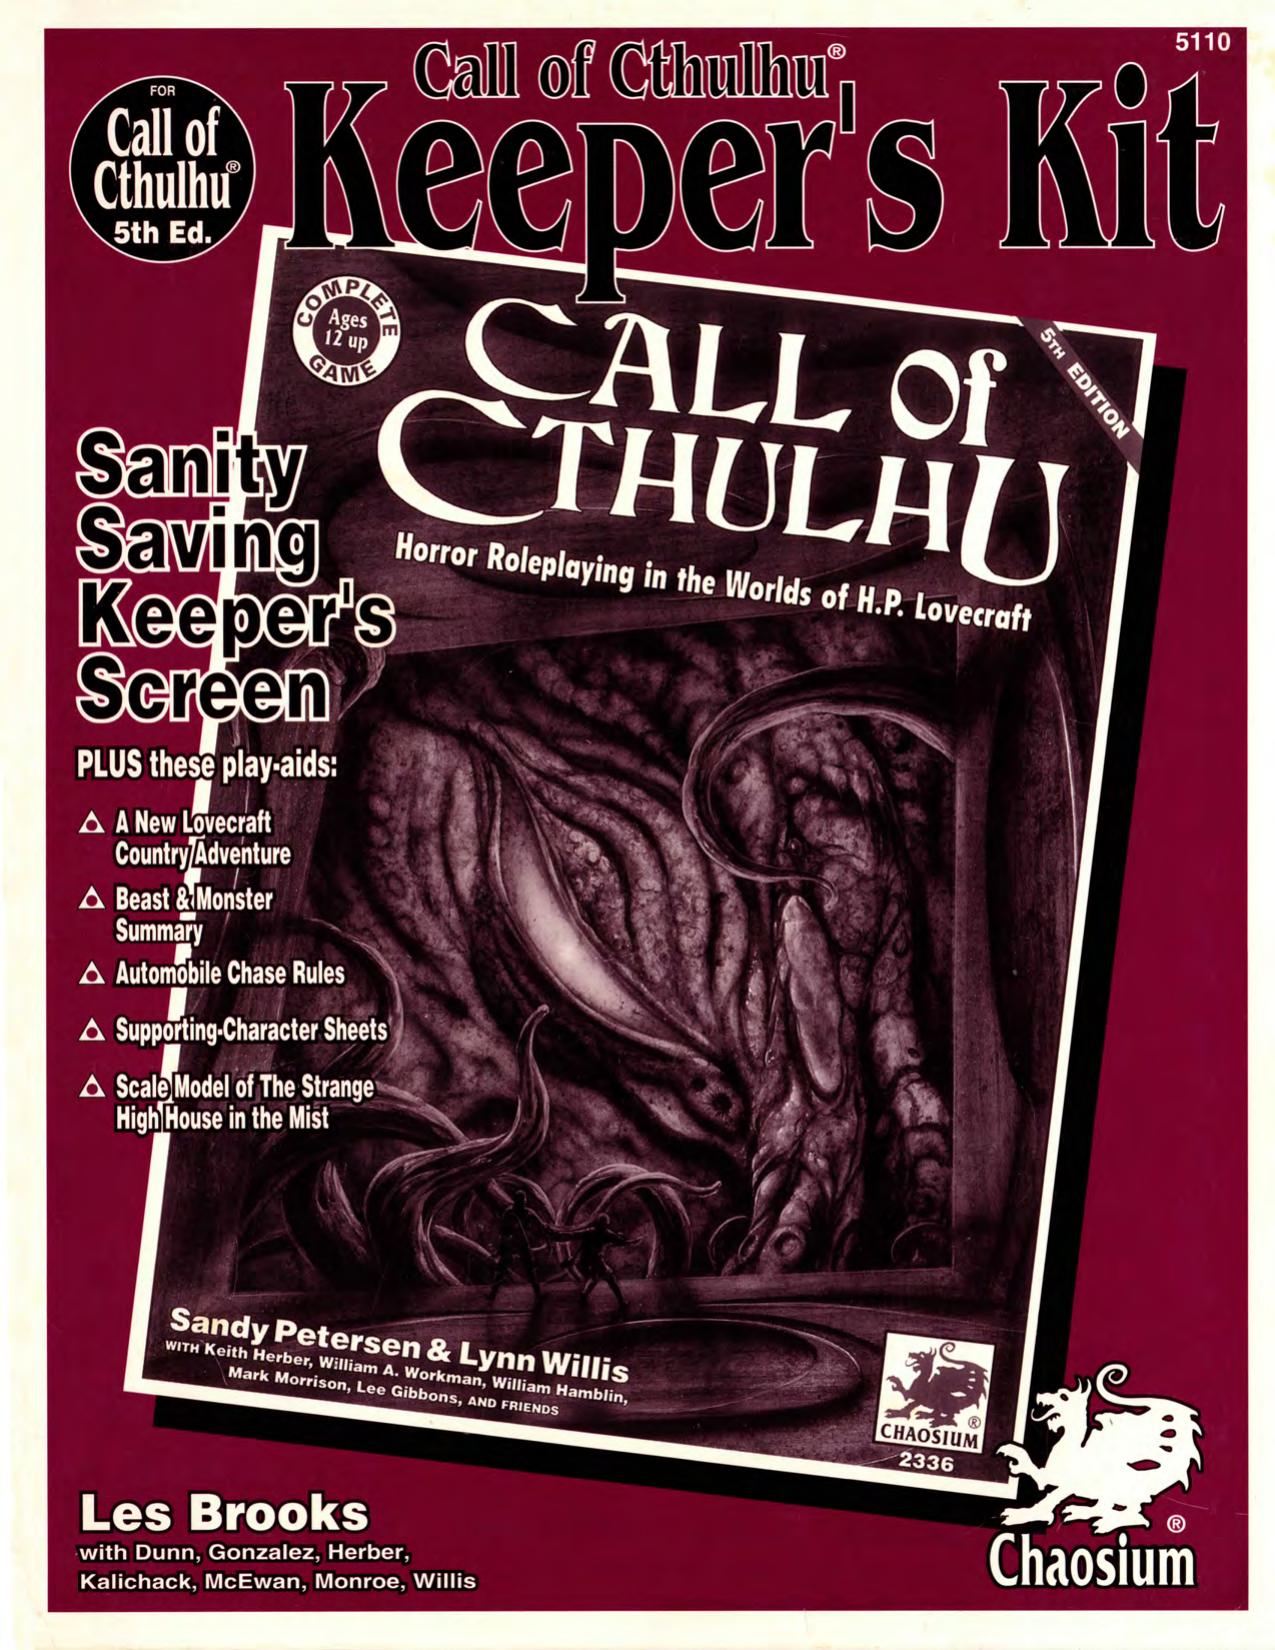 Call of Cthulhu - 5th Edition Keeper's Kit